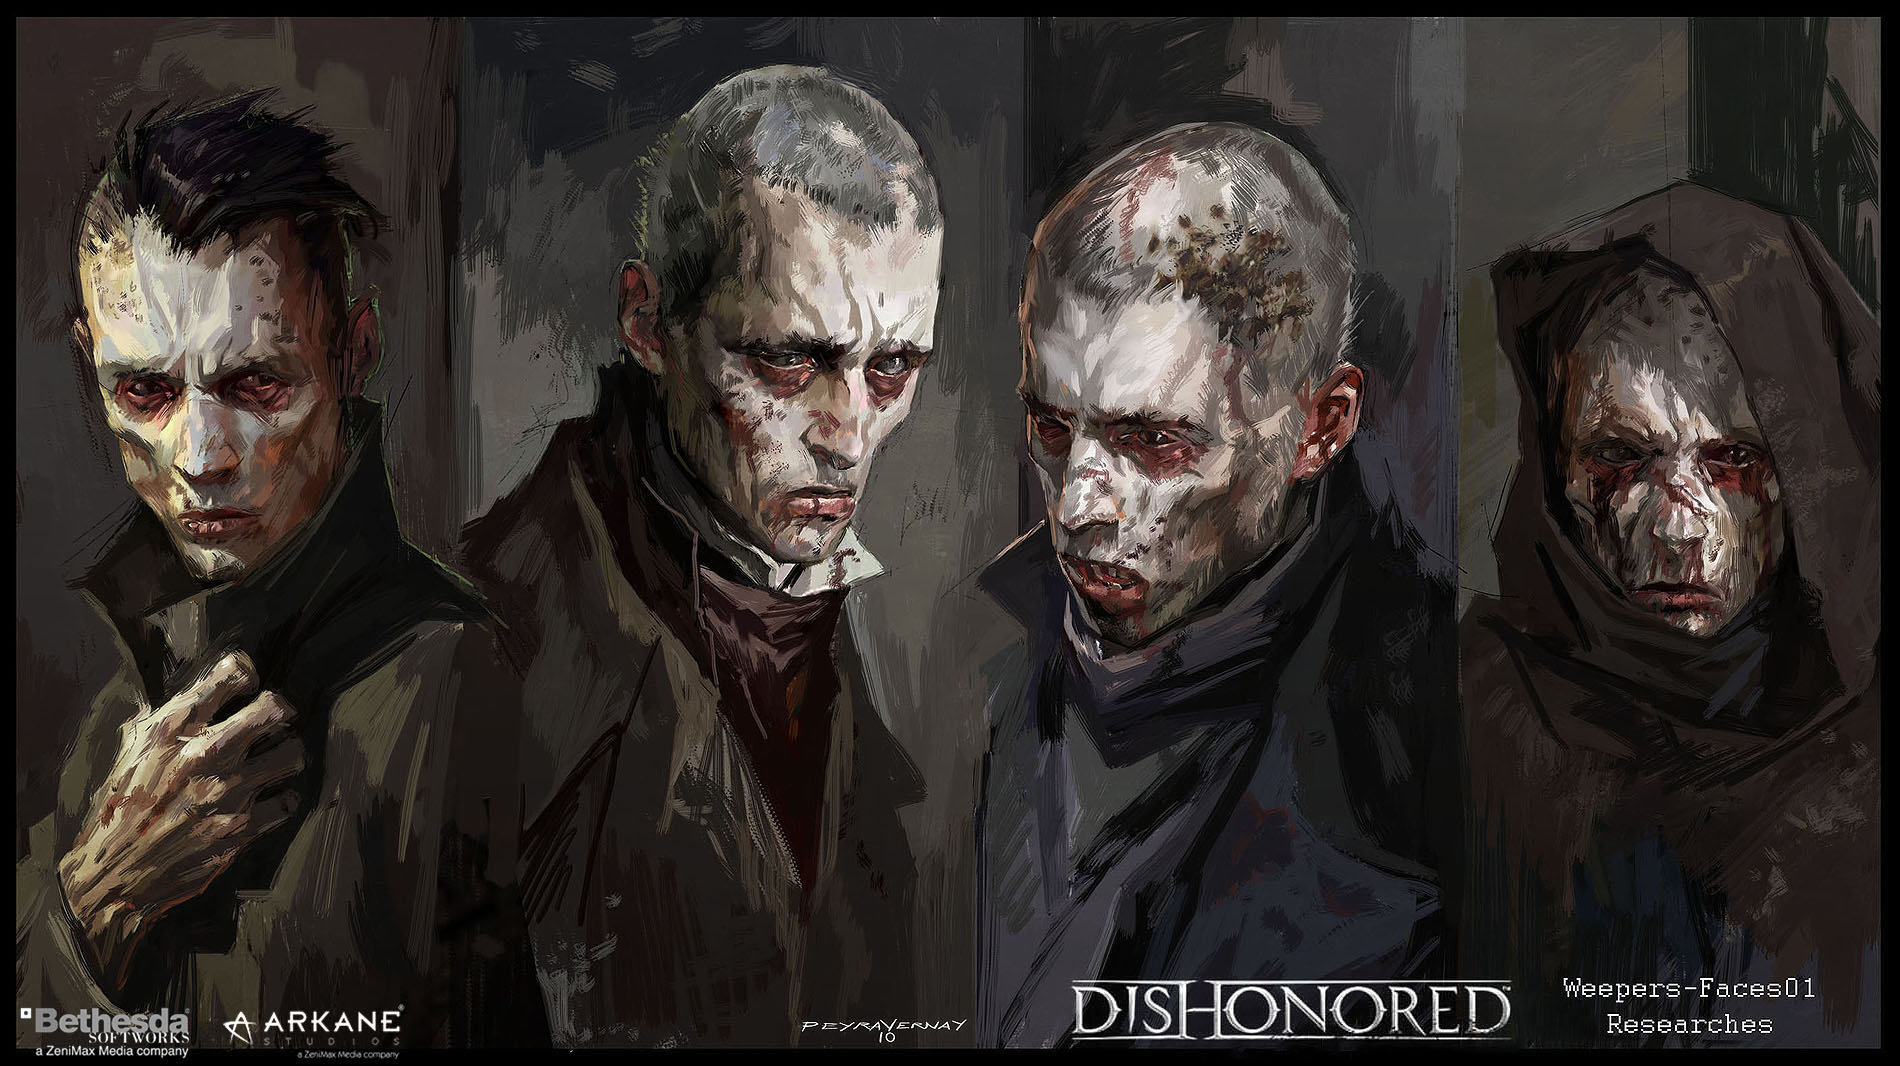 Fine Art: Dishonored Was Such A Beautiful Video Game